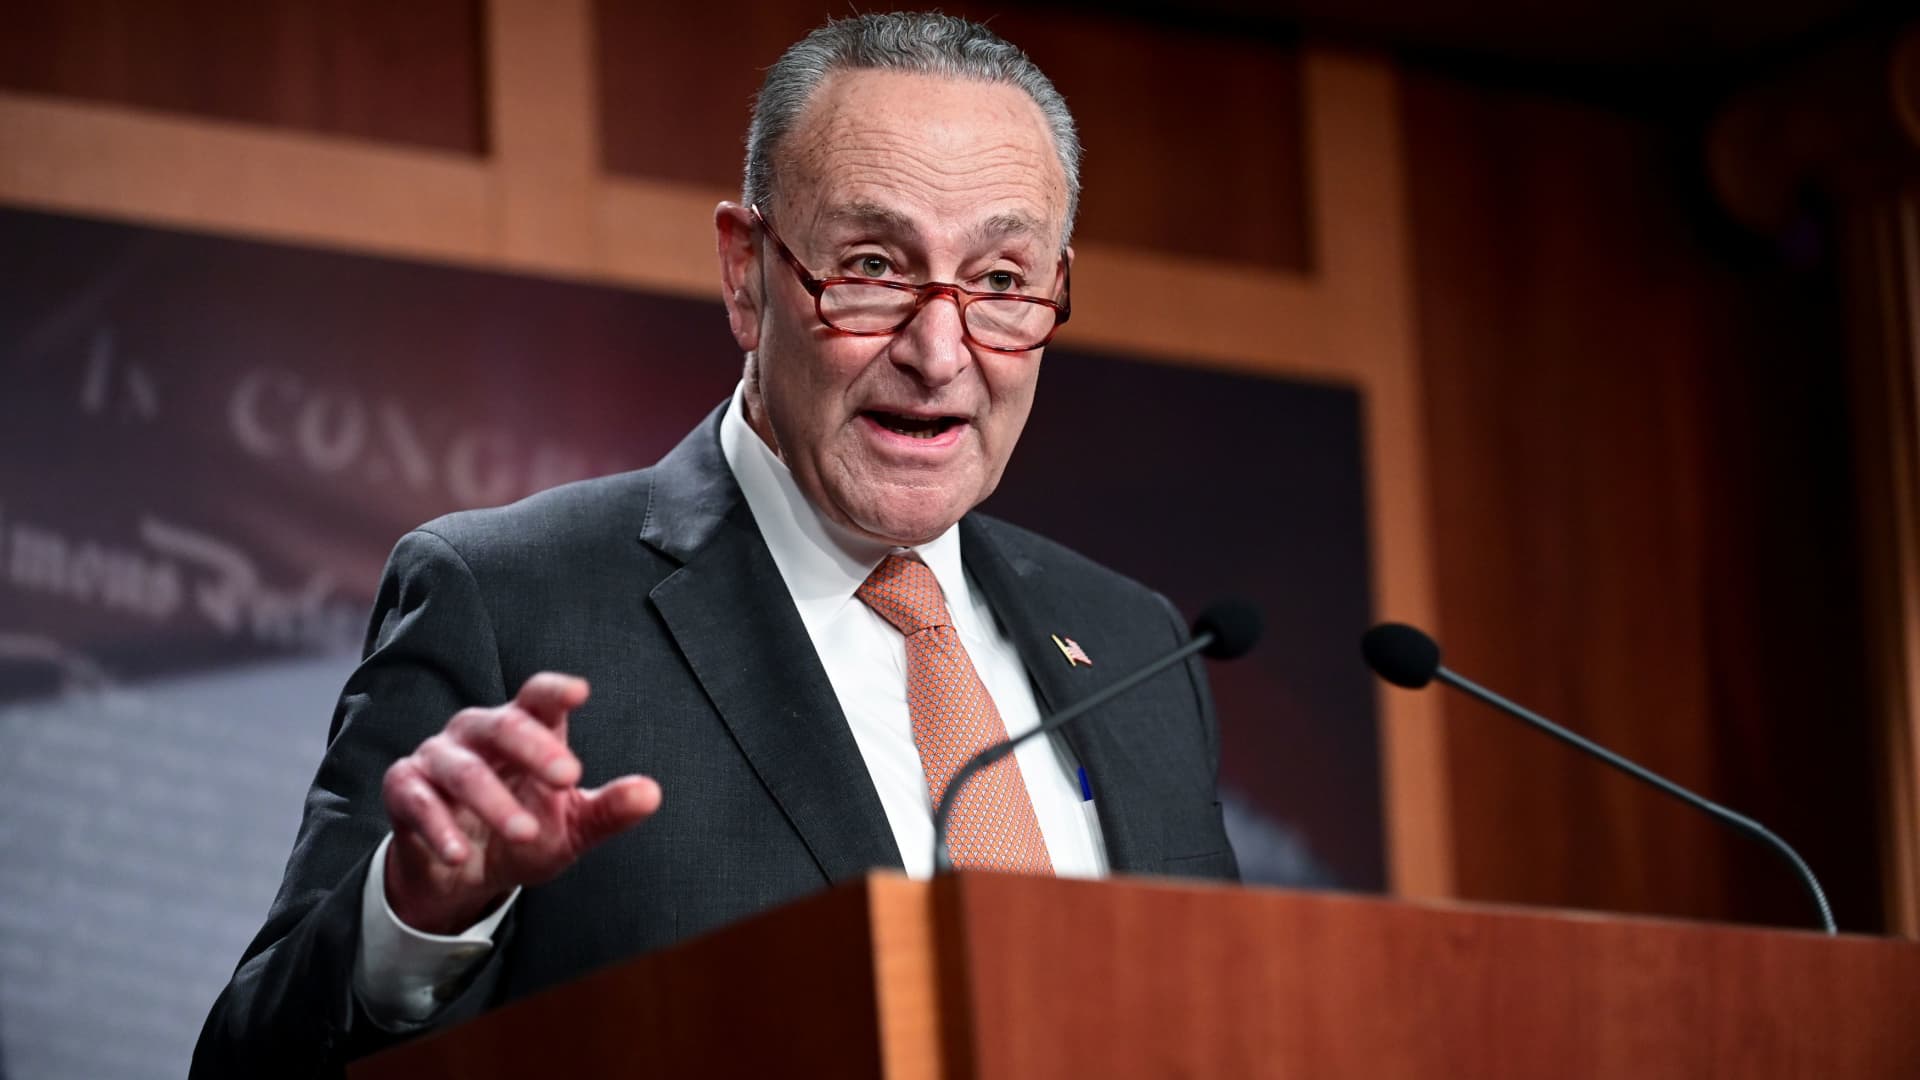 Senate Minority Leader Chuck Schumer (D-NY) speaks during a news conference at the U.S. Capitol in Washington, December 8, 2020.